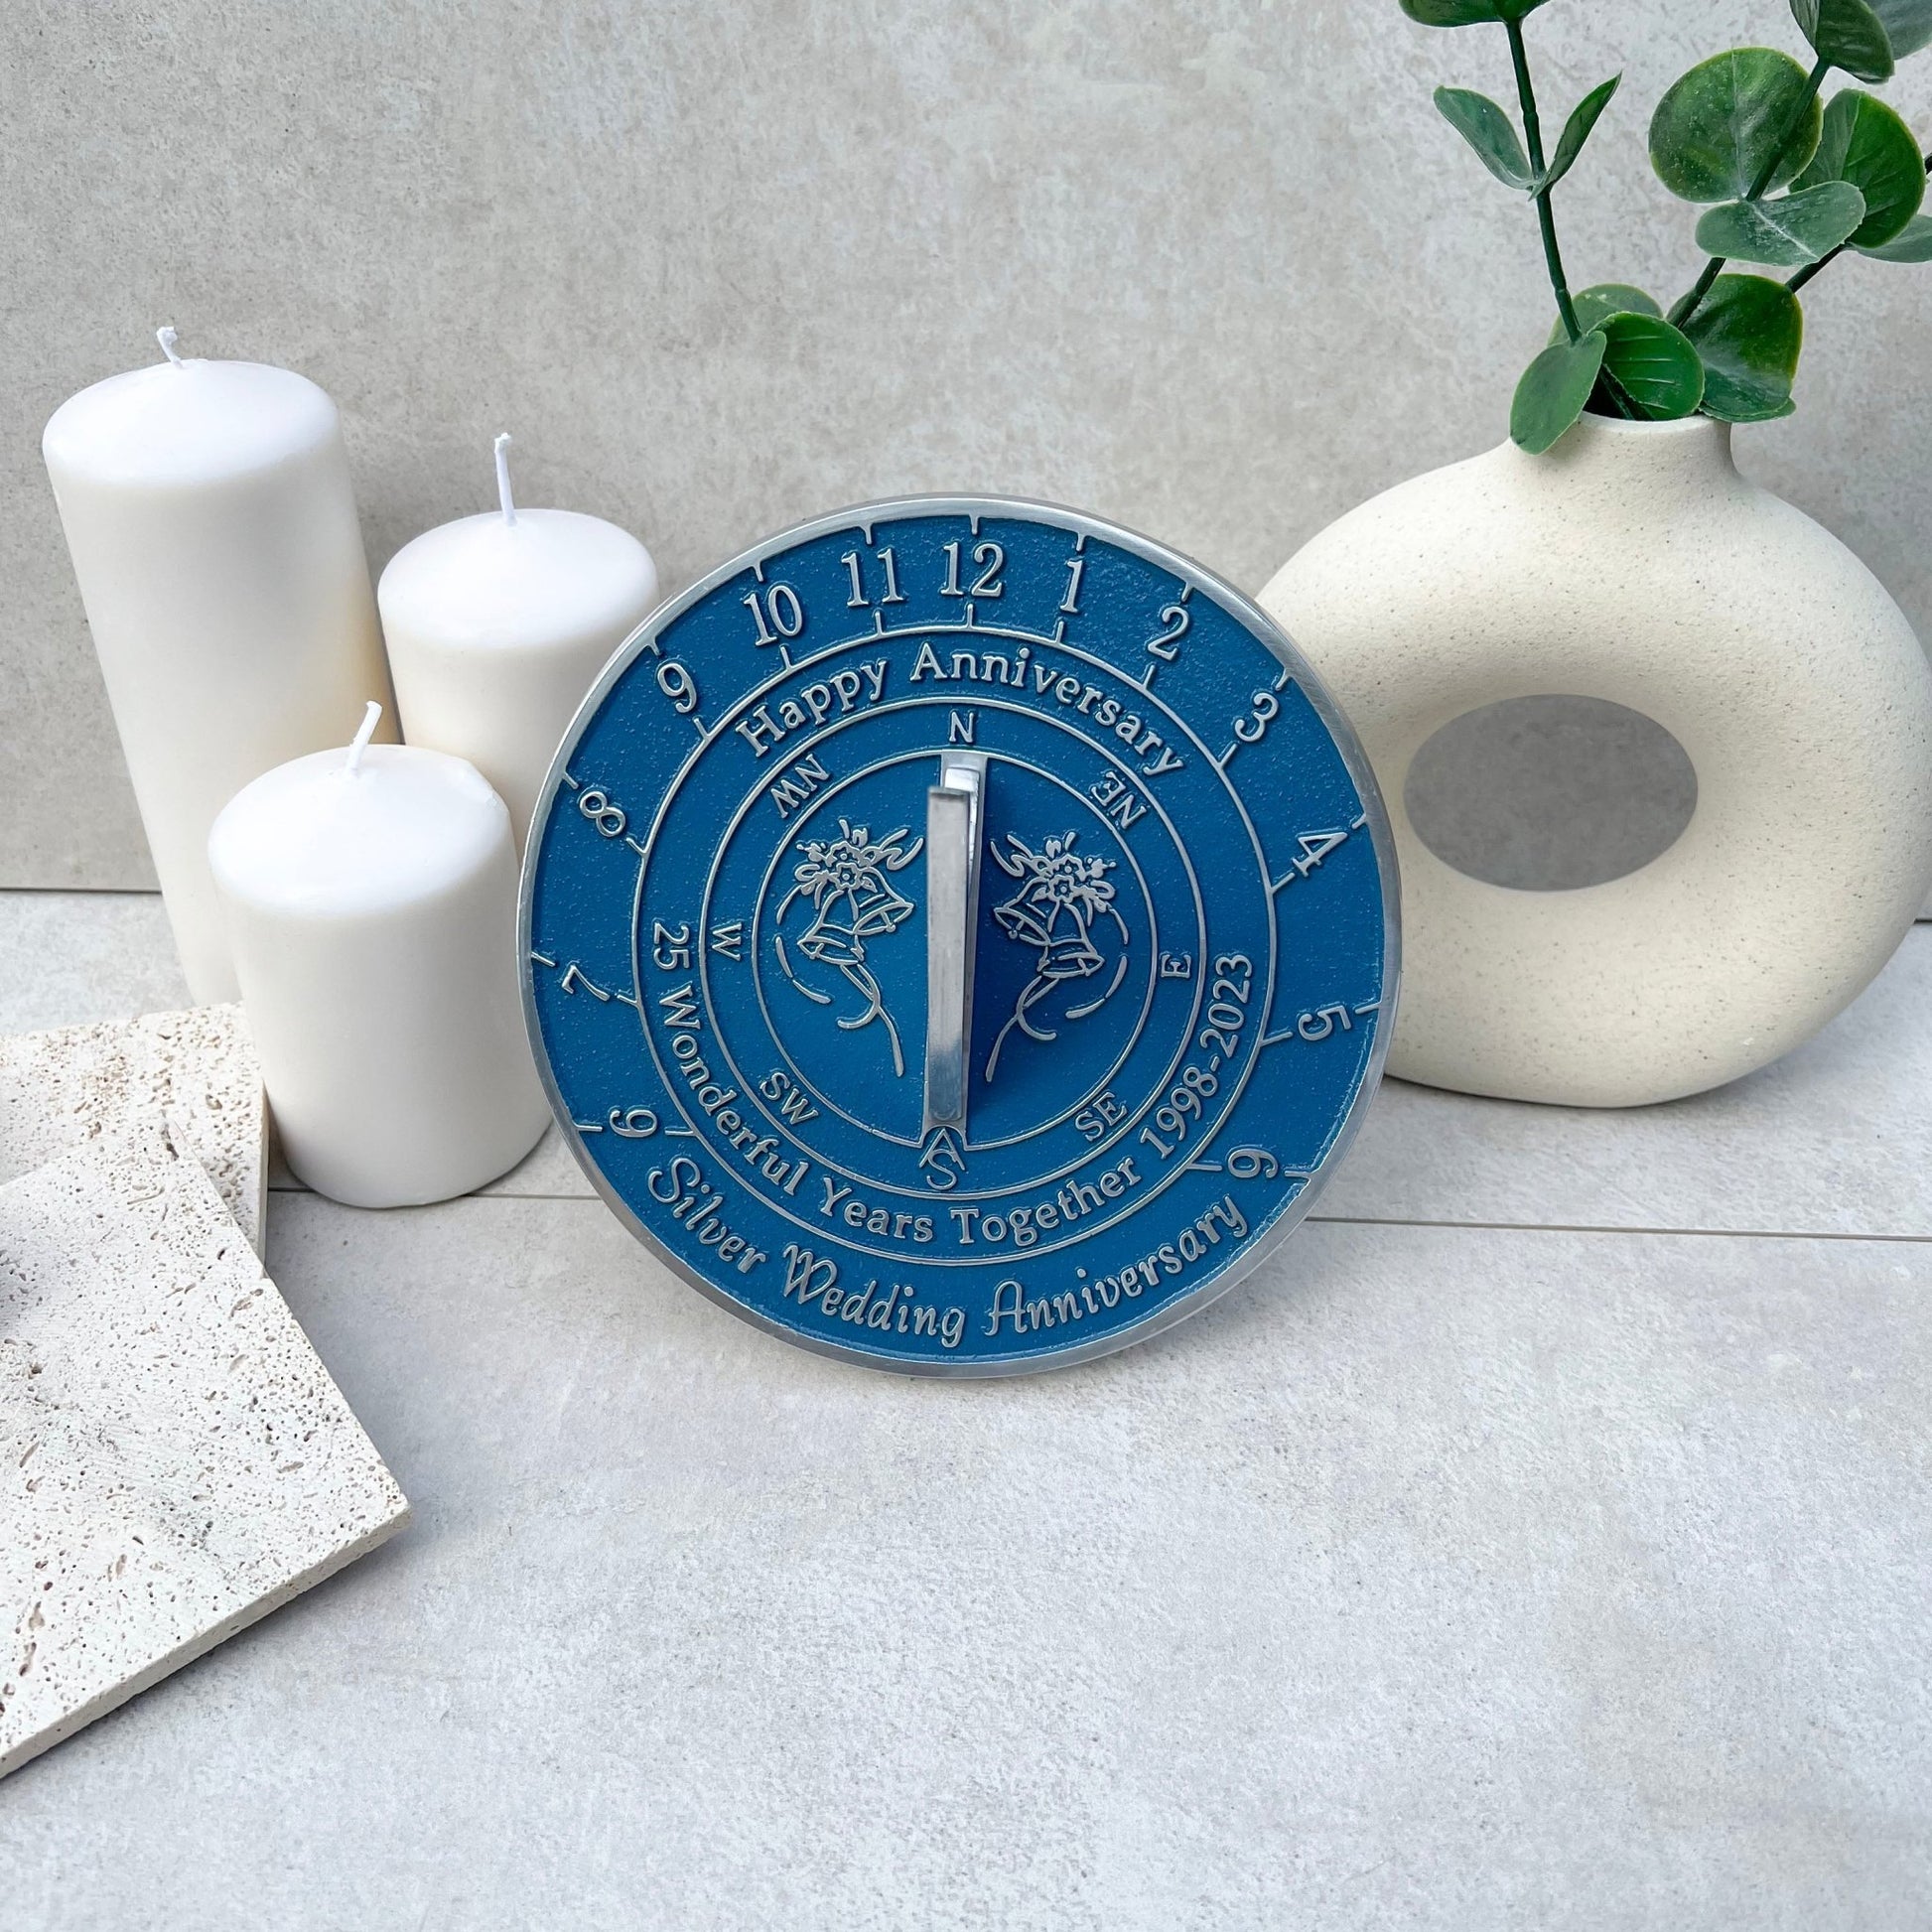 Silver 25th Anniversary Sundial® 2023 Edition - The Metal Foundry